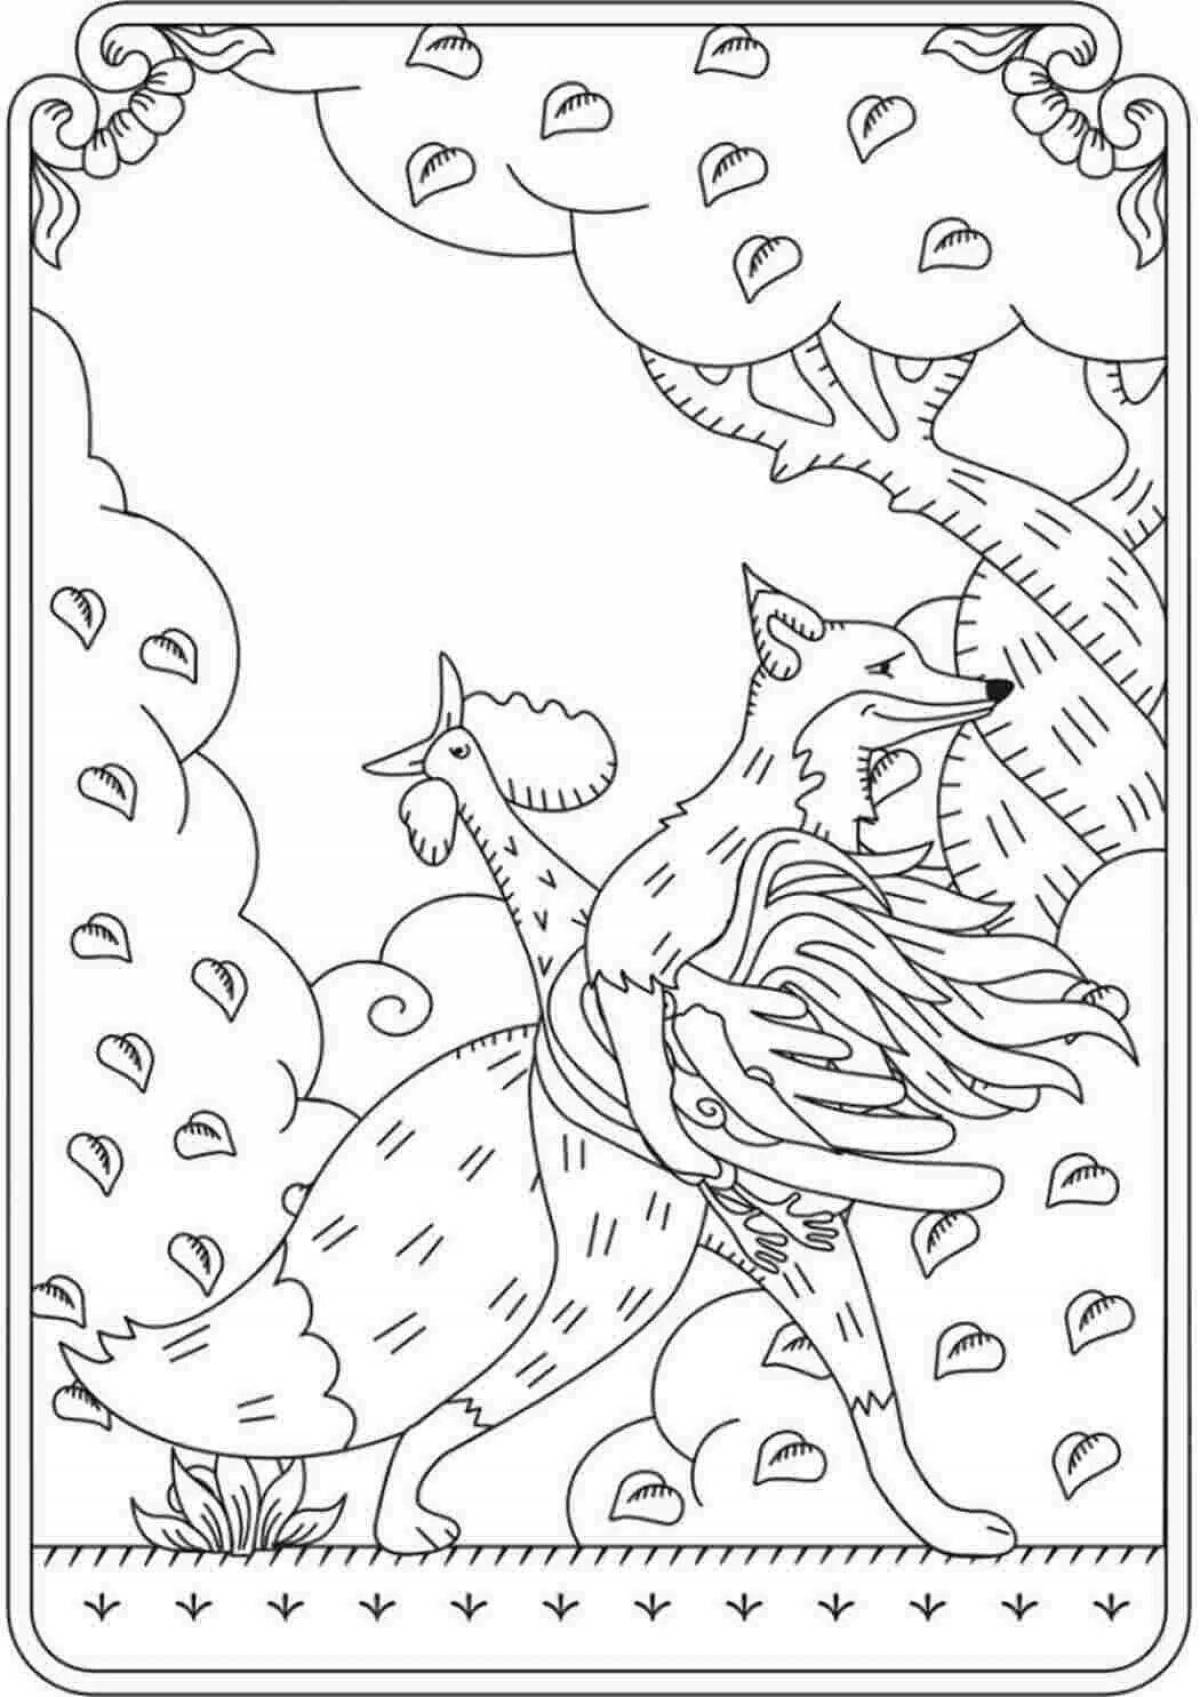 Great grouse and fox coloring pages